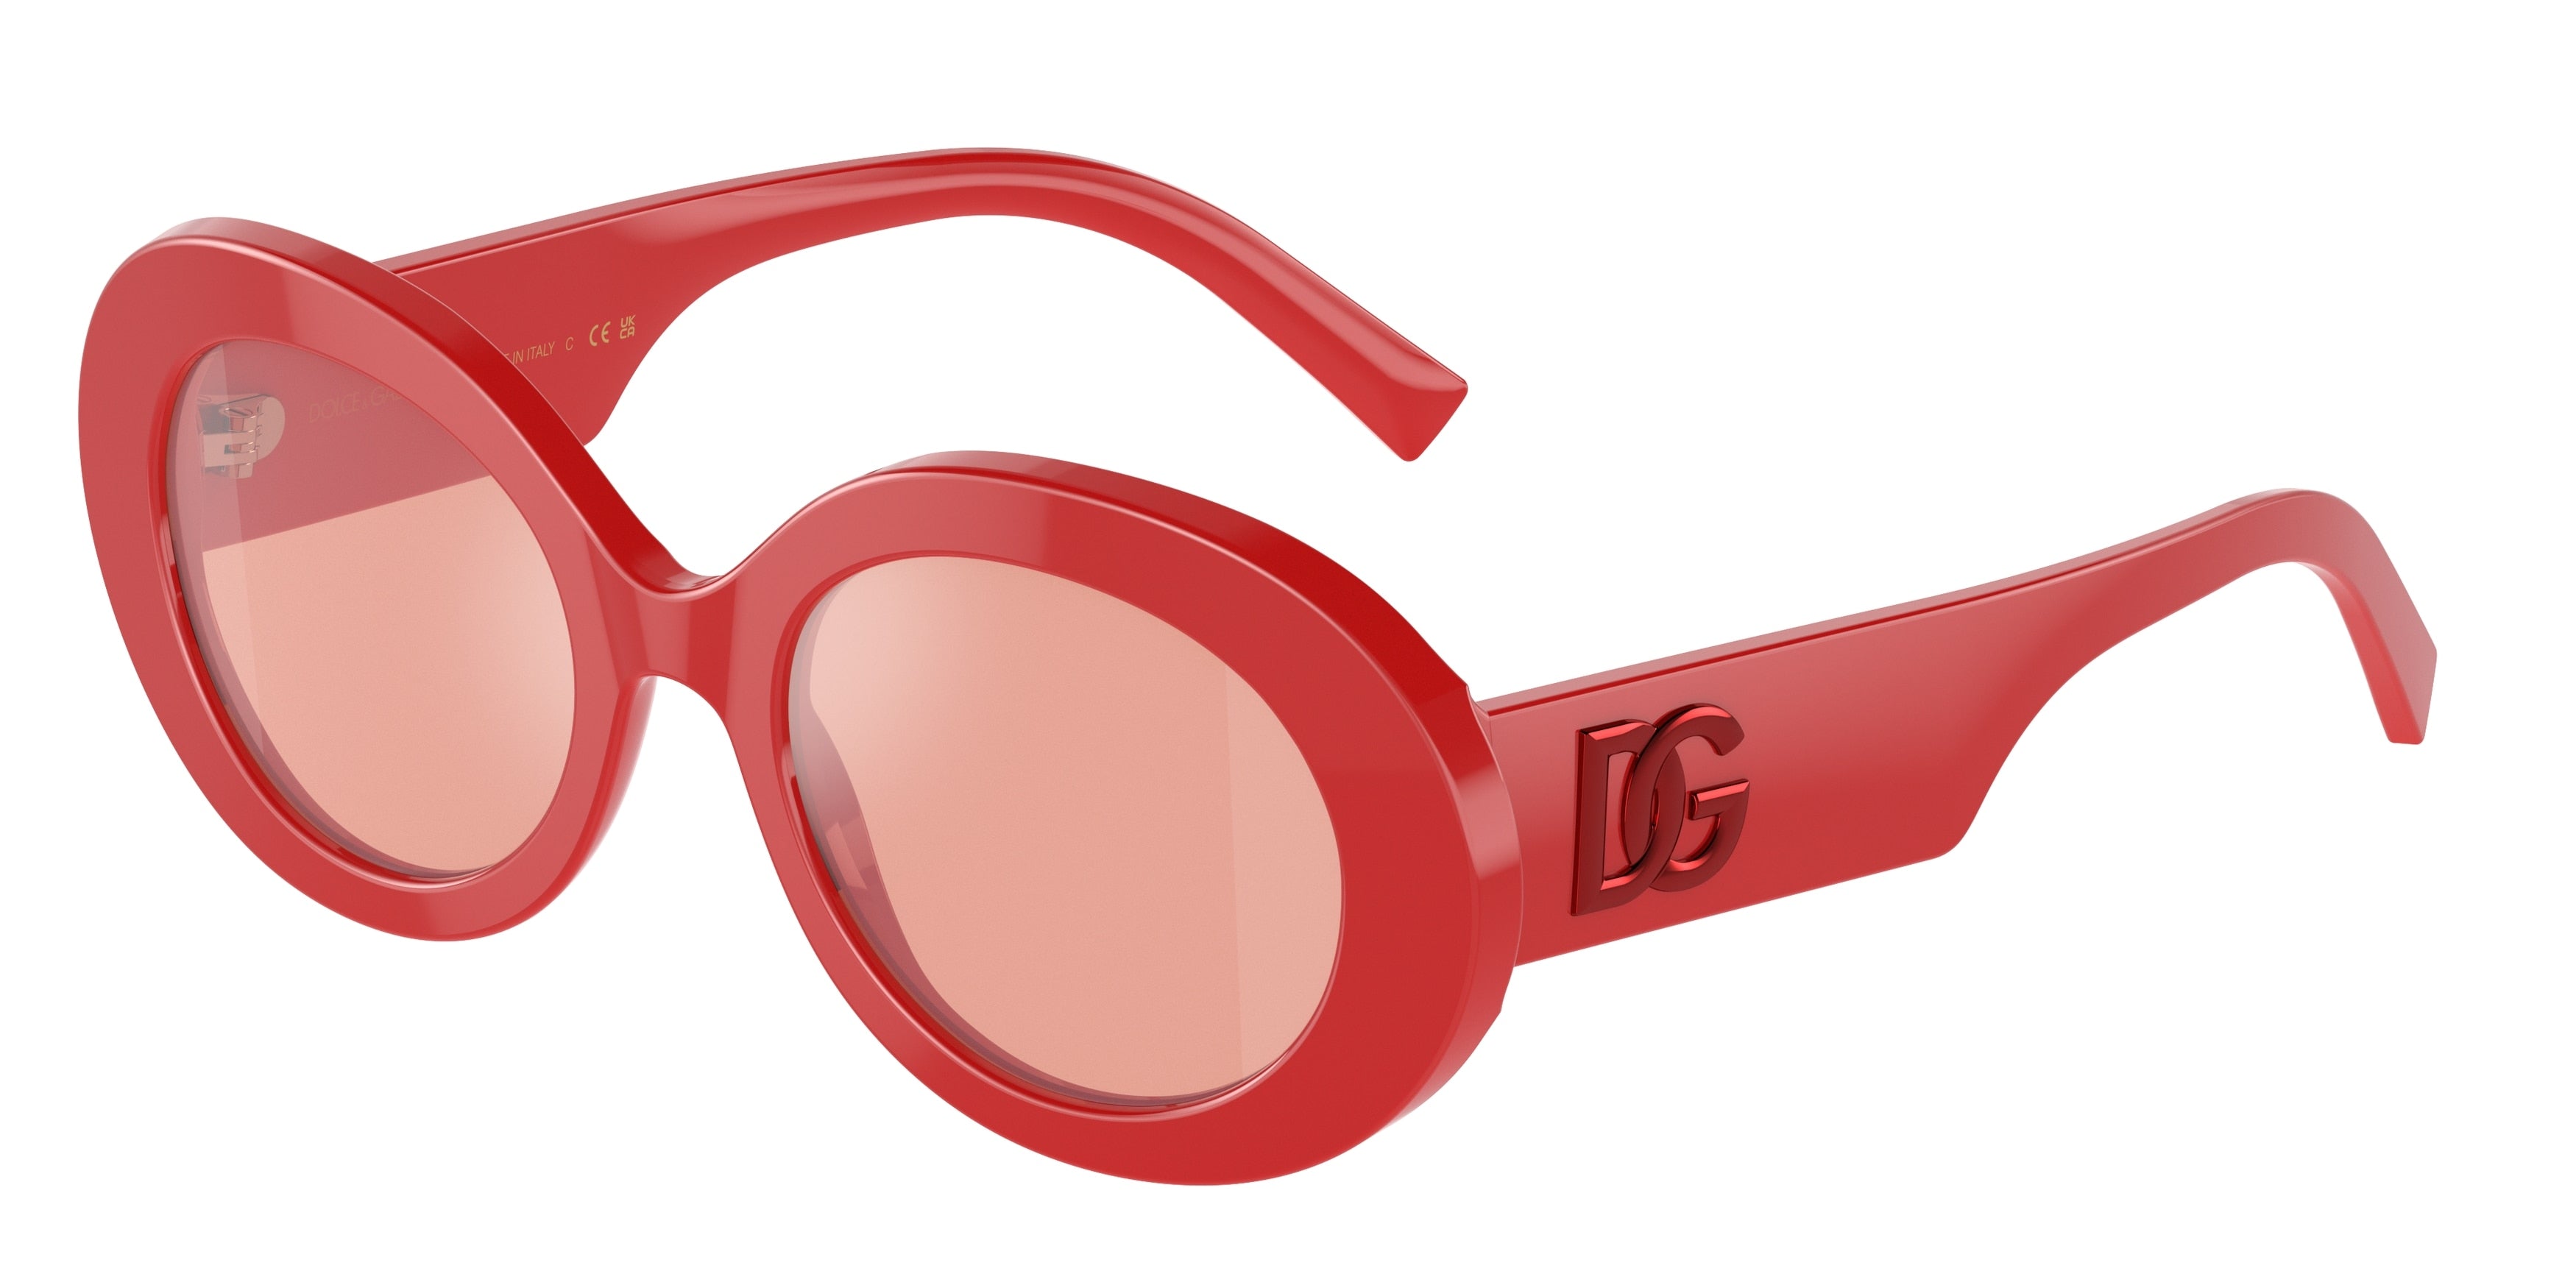 DOLCE & GABBANA DG4448 Oval Sunglasses  3088E4-Red 51-145-20 - Color Map Red